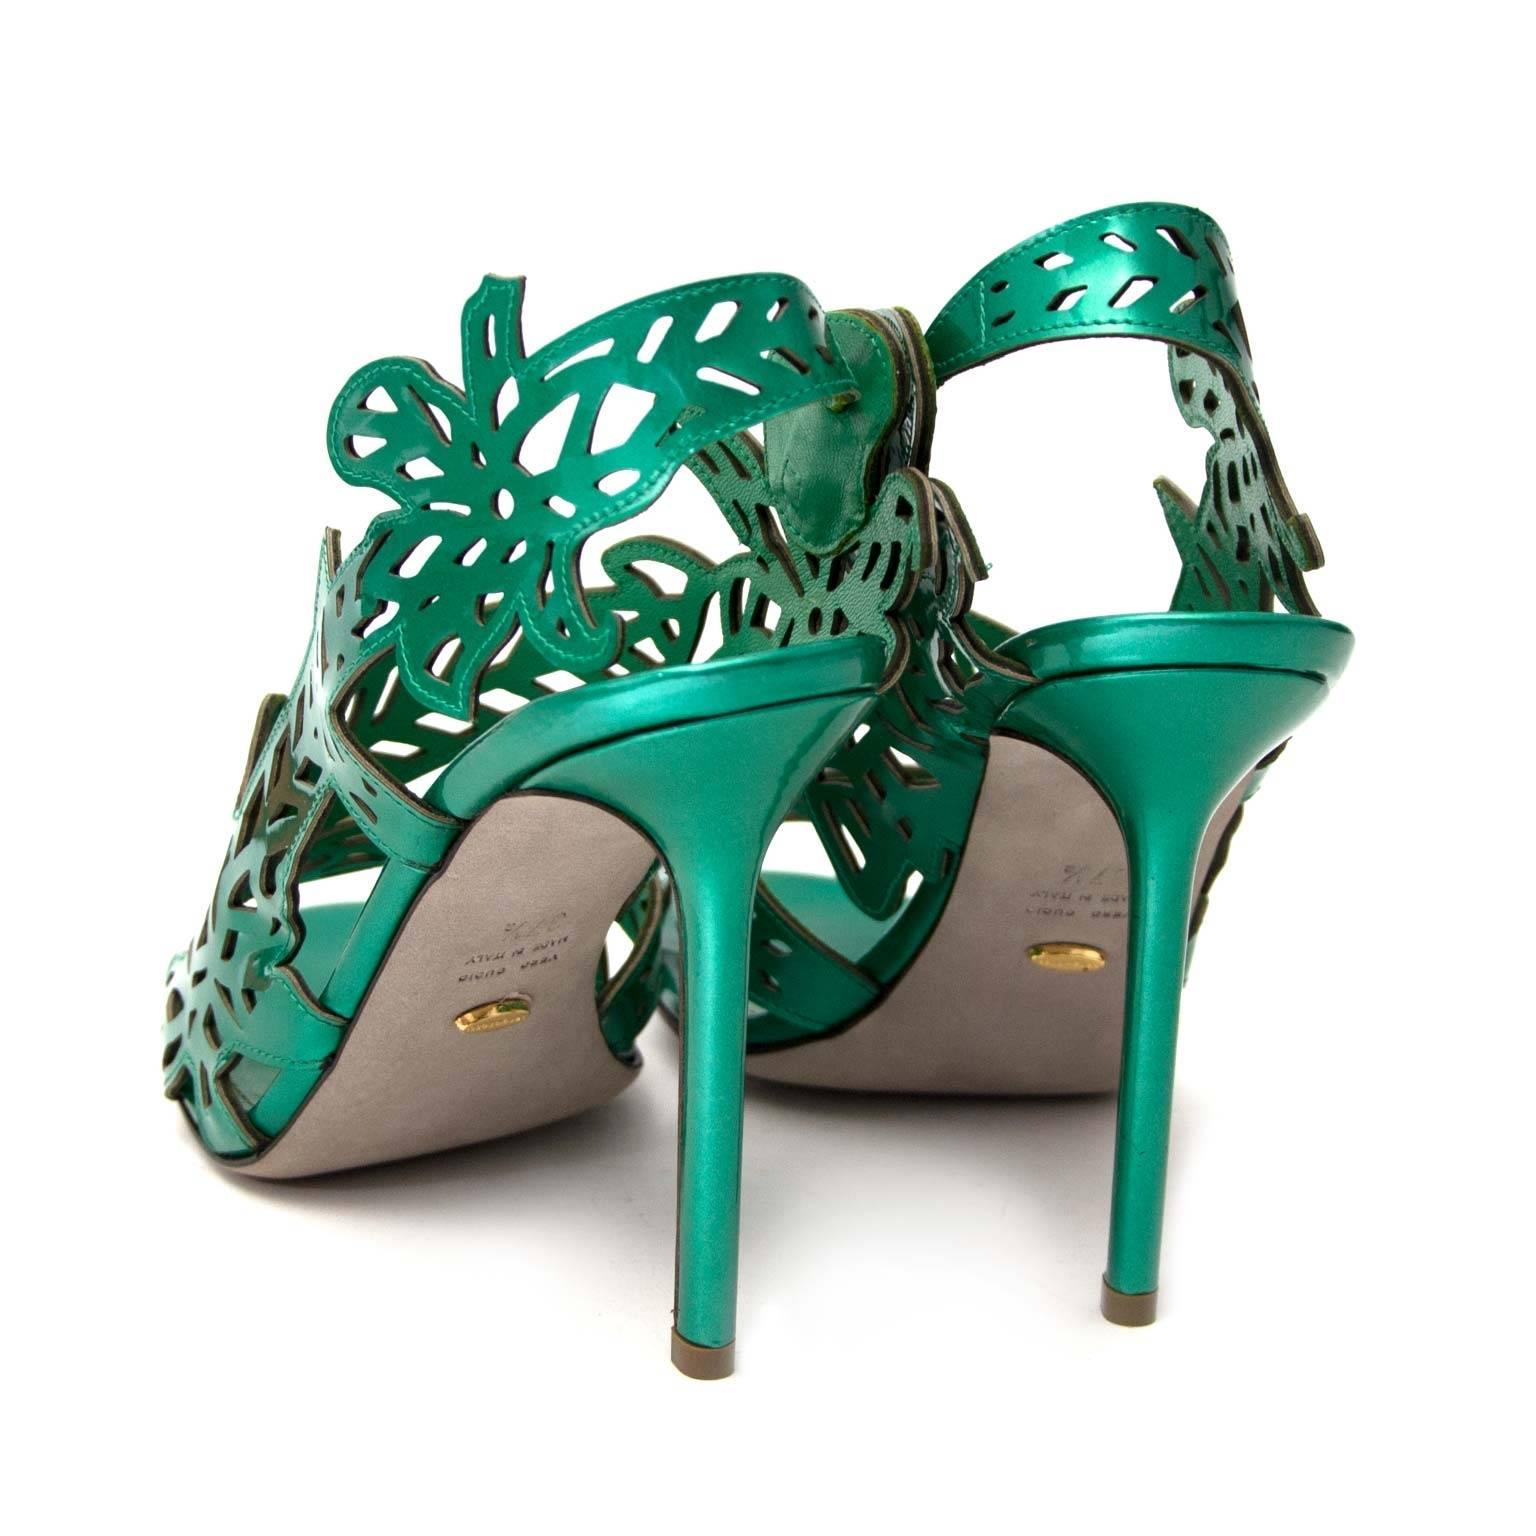 As New

Estimated Retail Price: € 

Sergio Rossi Green Patent Cut-Out Sandals - Size 37,5

Showstopper alert! These gorgeous heeled sandals have an amazing green colour with patent coating. The stiletto heels will give you an elevated and super